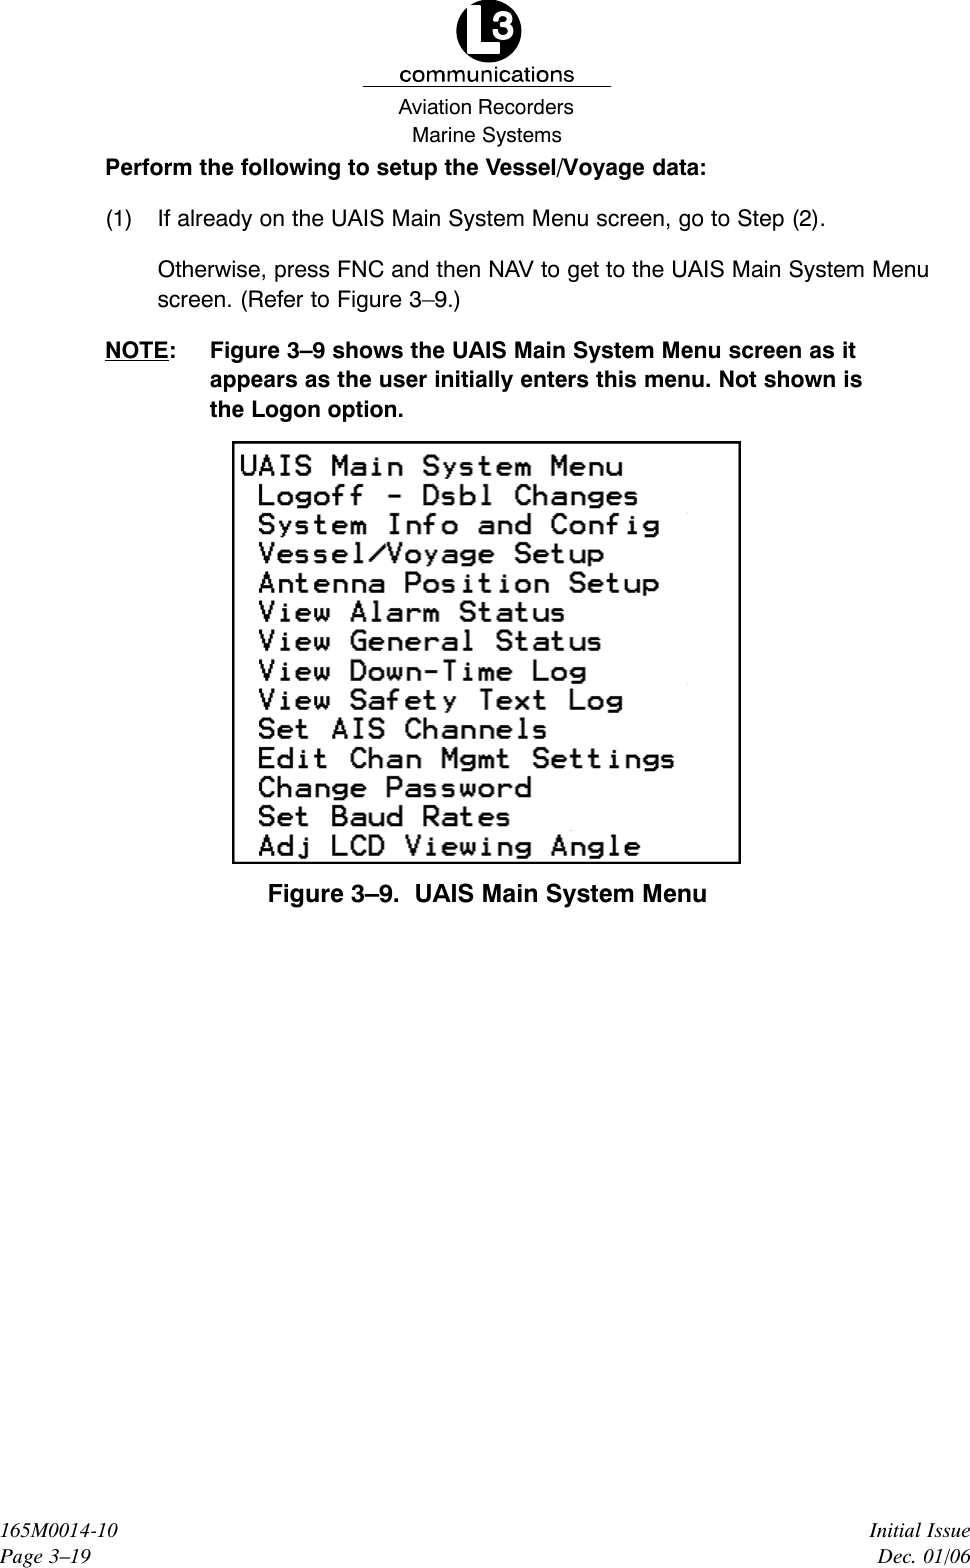 Marine SystemsAviation RecordersInitial IssueDec. 01/06165M0014-10Page 3–19Perform the following to setup the Vessel/Voyage data:(1) If already on the UAIS Main System Menu screen, go to Step (2).Otherwise, press FNC and then NAV to get to the UAIS Main System Menuscreen. (Refer to Figure 3–9.)NOTE: Figure 3–9 shows the UAIS Main System Menu screen as itappears as the user initially enters this menu. Not shown isthe Logon option.Figure 3–9.  UAIS Main System Menu